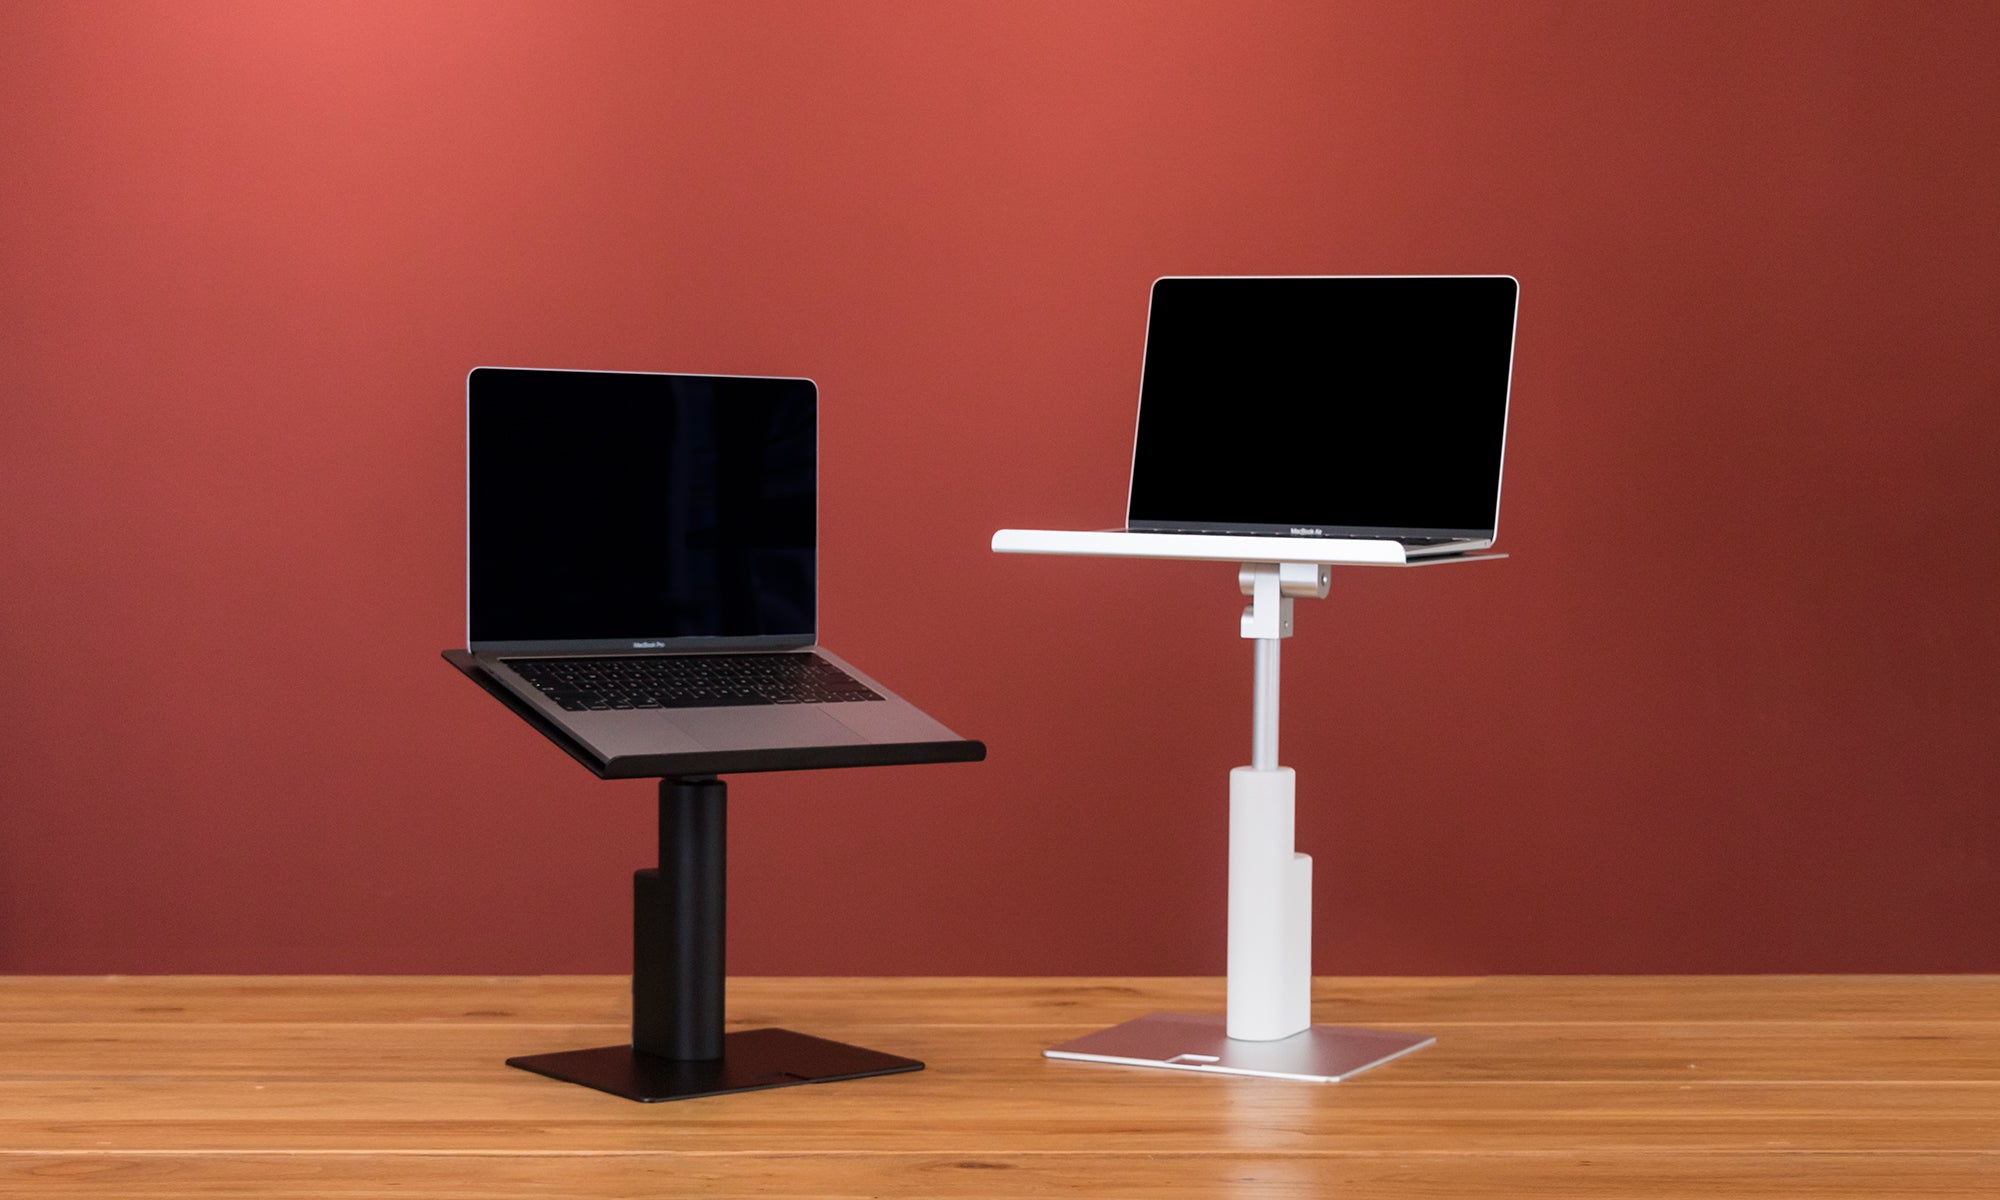 maxtand e-power rising laptop stand in black and white on wooden tabletop and red wallpaper